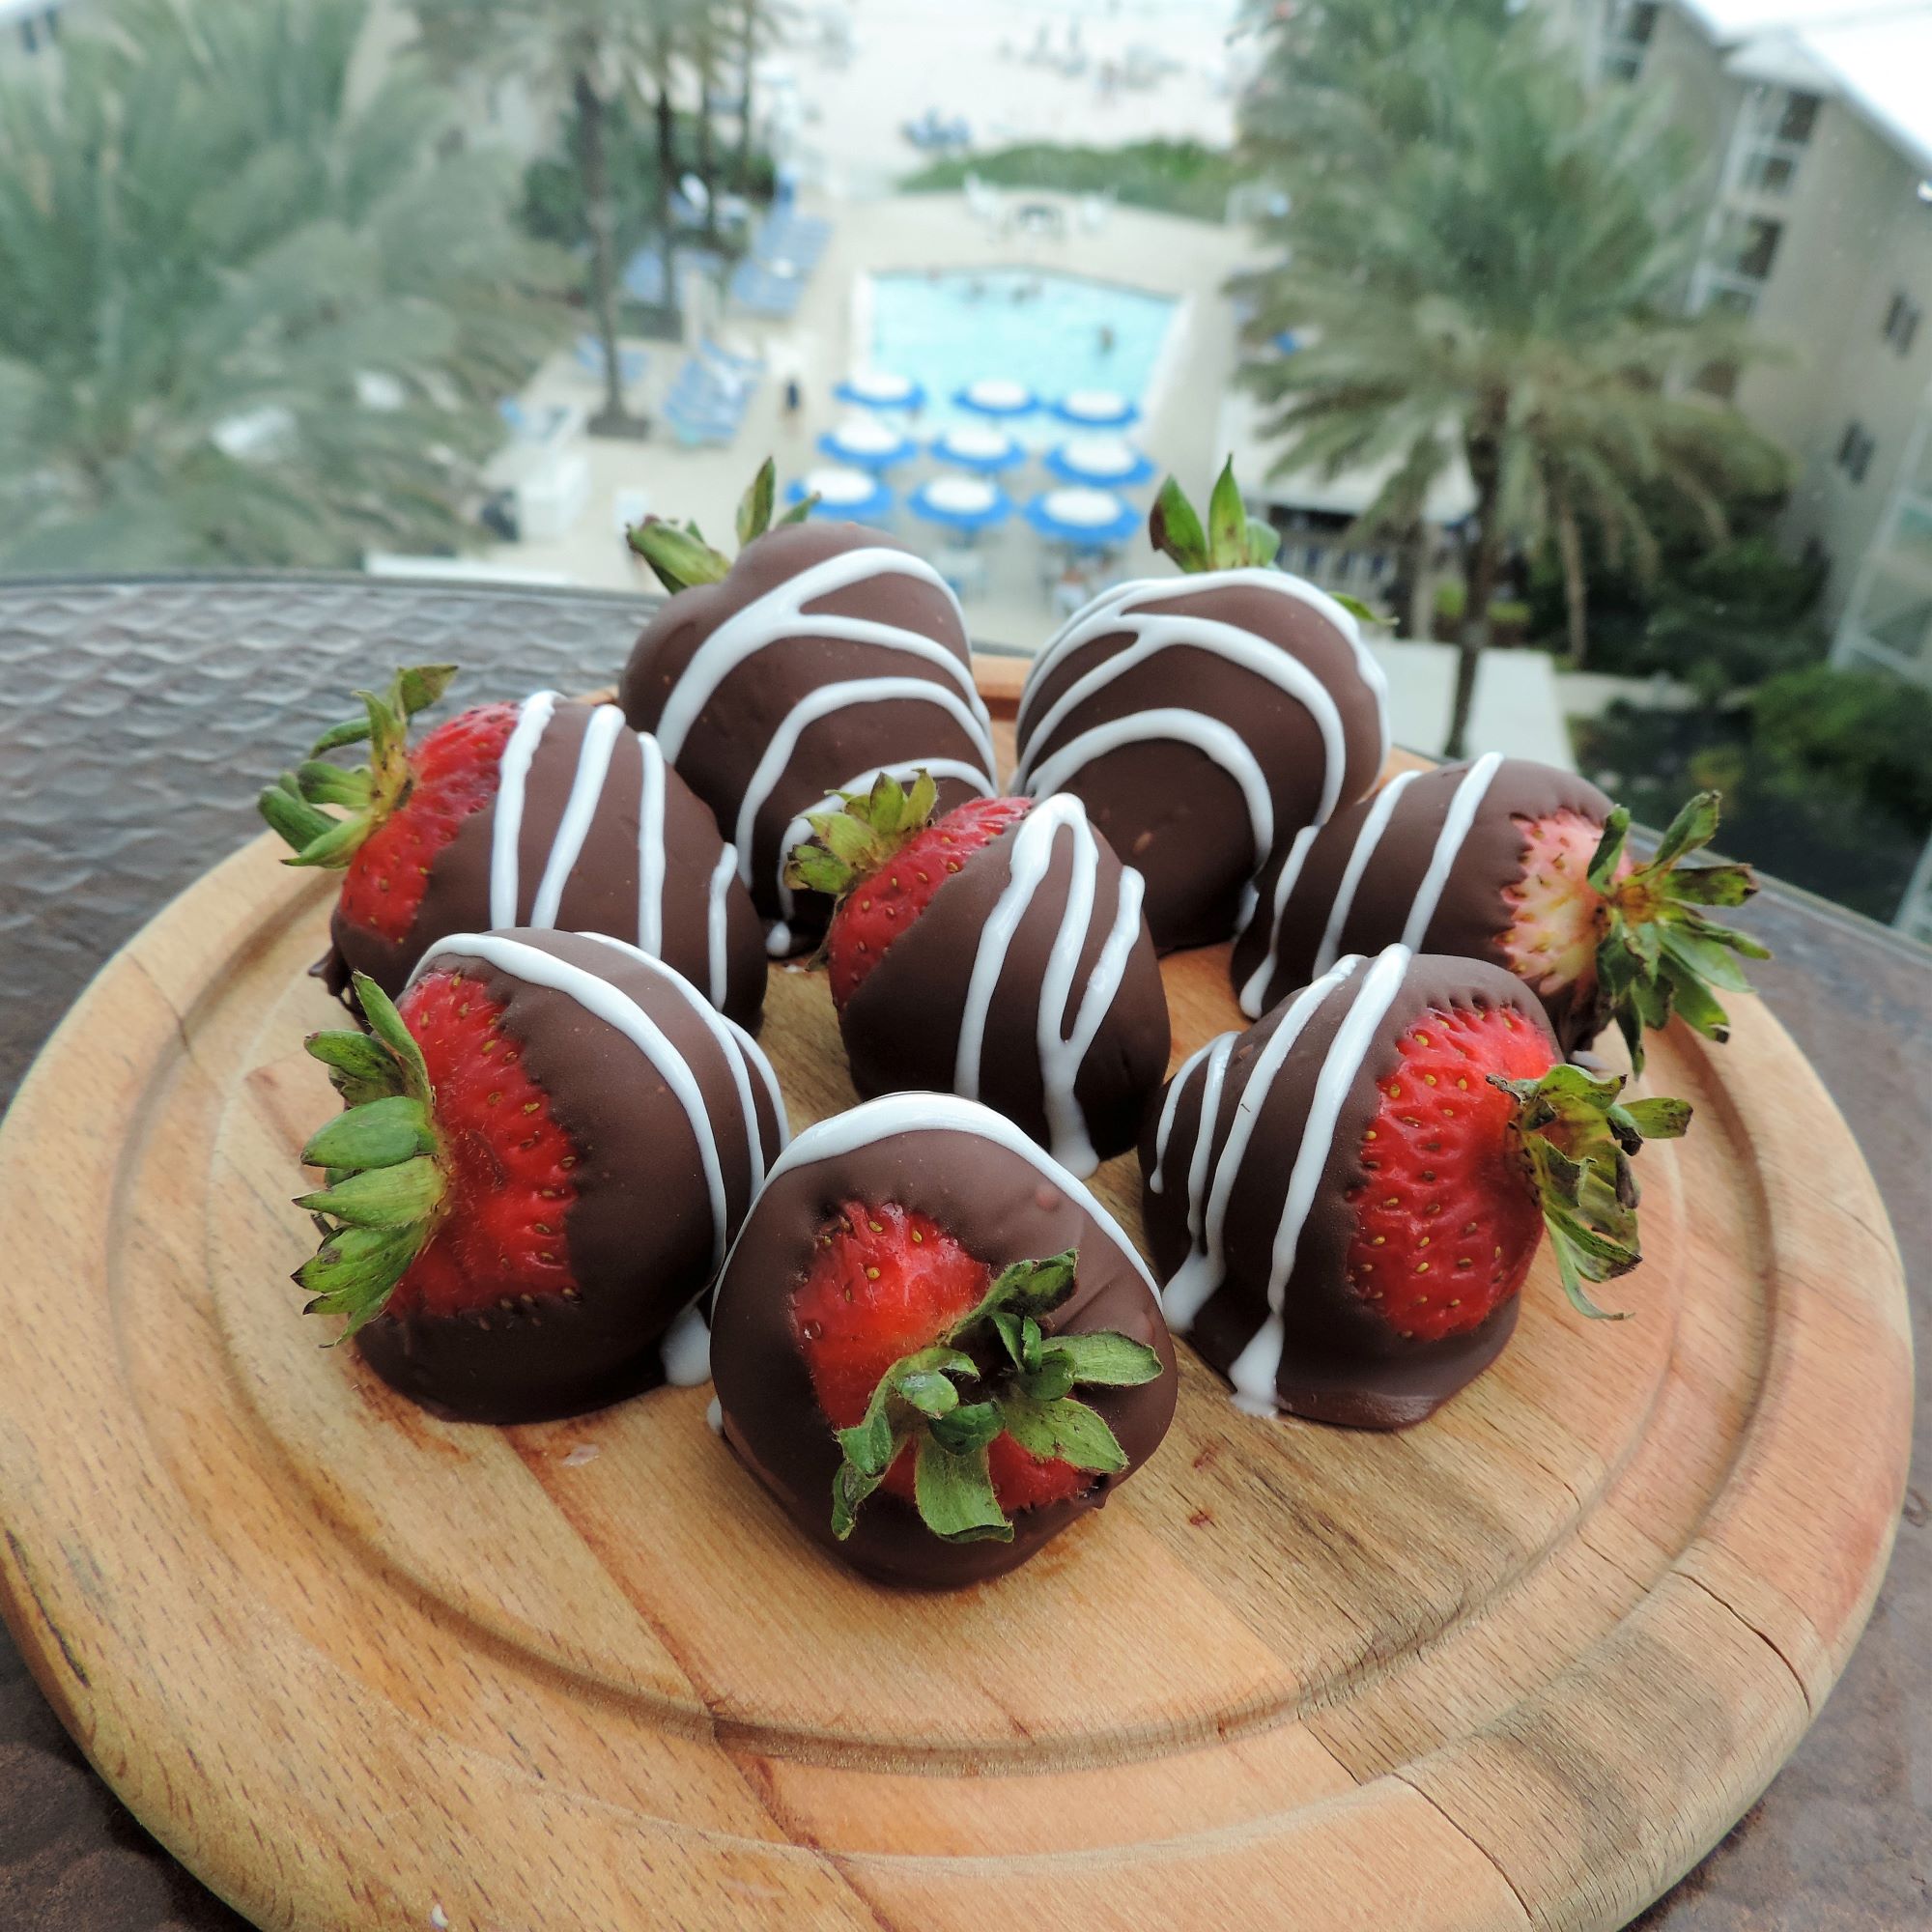 Image 0 of Chocolate Covered Strawberries